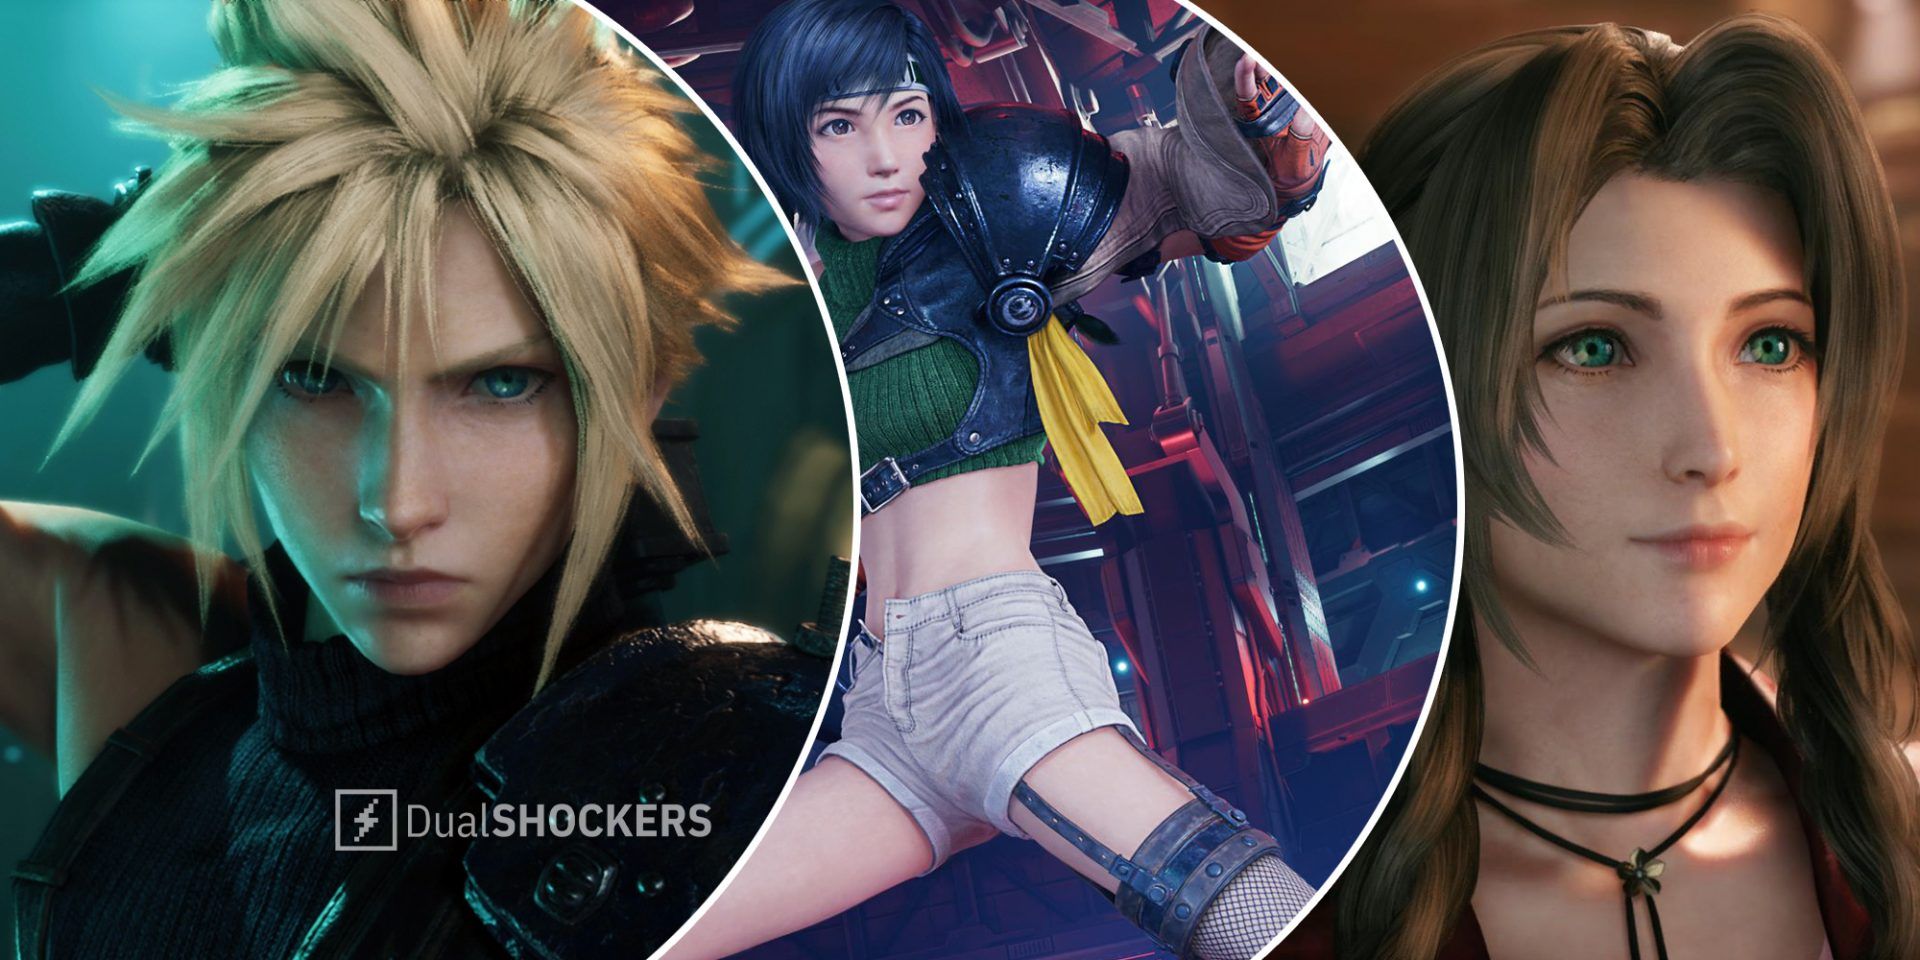 Final Fantasy 7 Cloud Strife on left, Tifa Lockhart in middle, Aerith Gainsborough on right